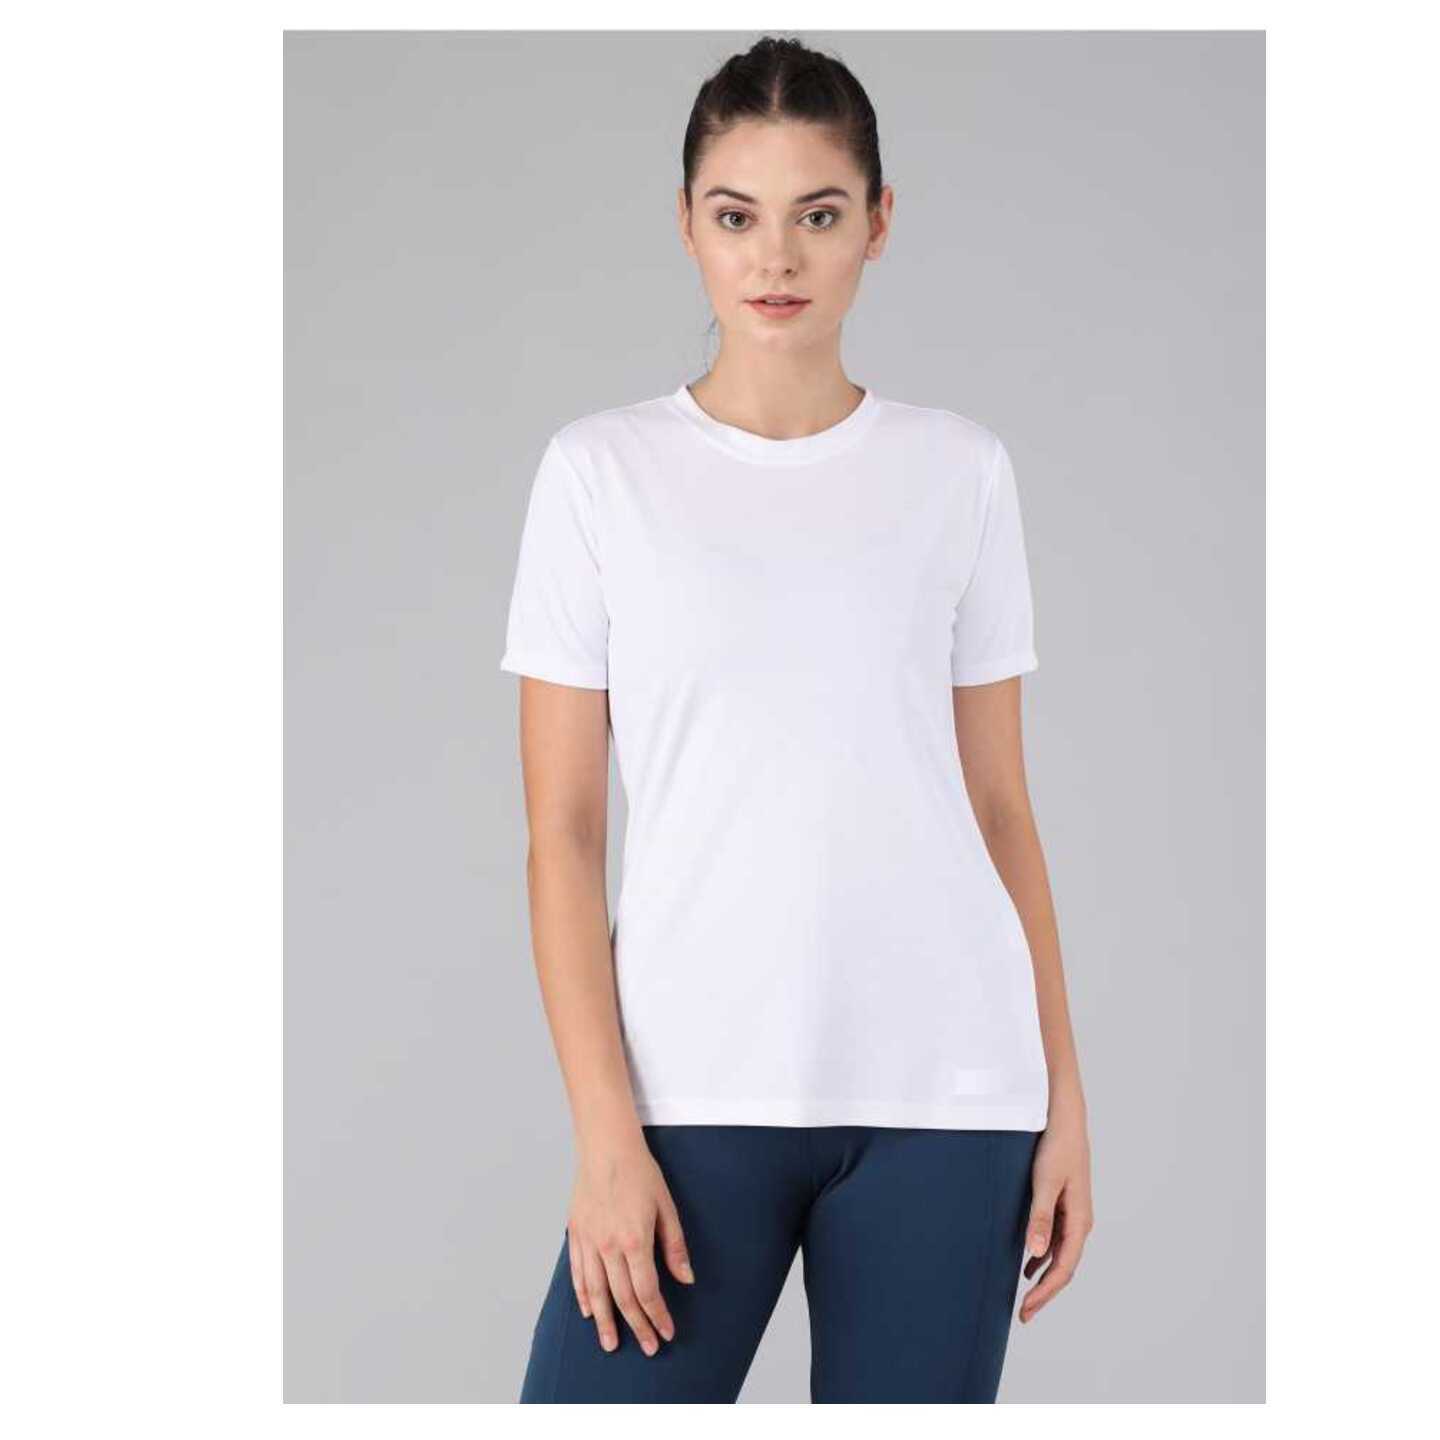 Solid White T-Shirt